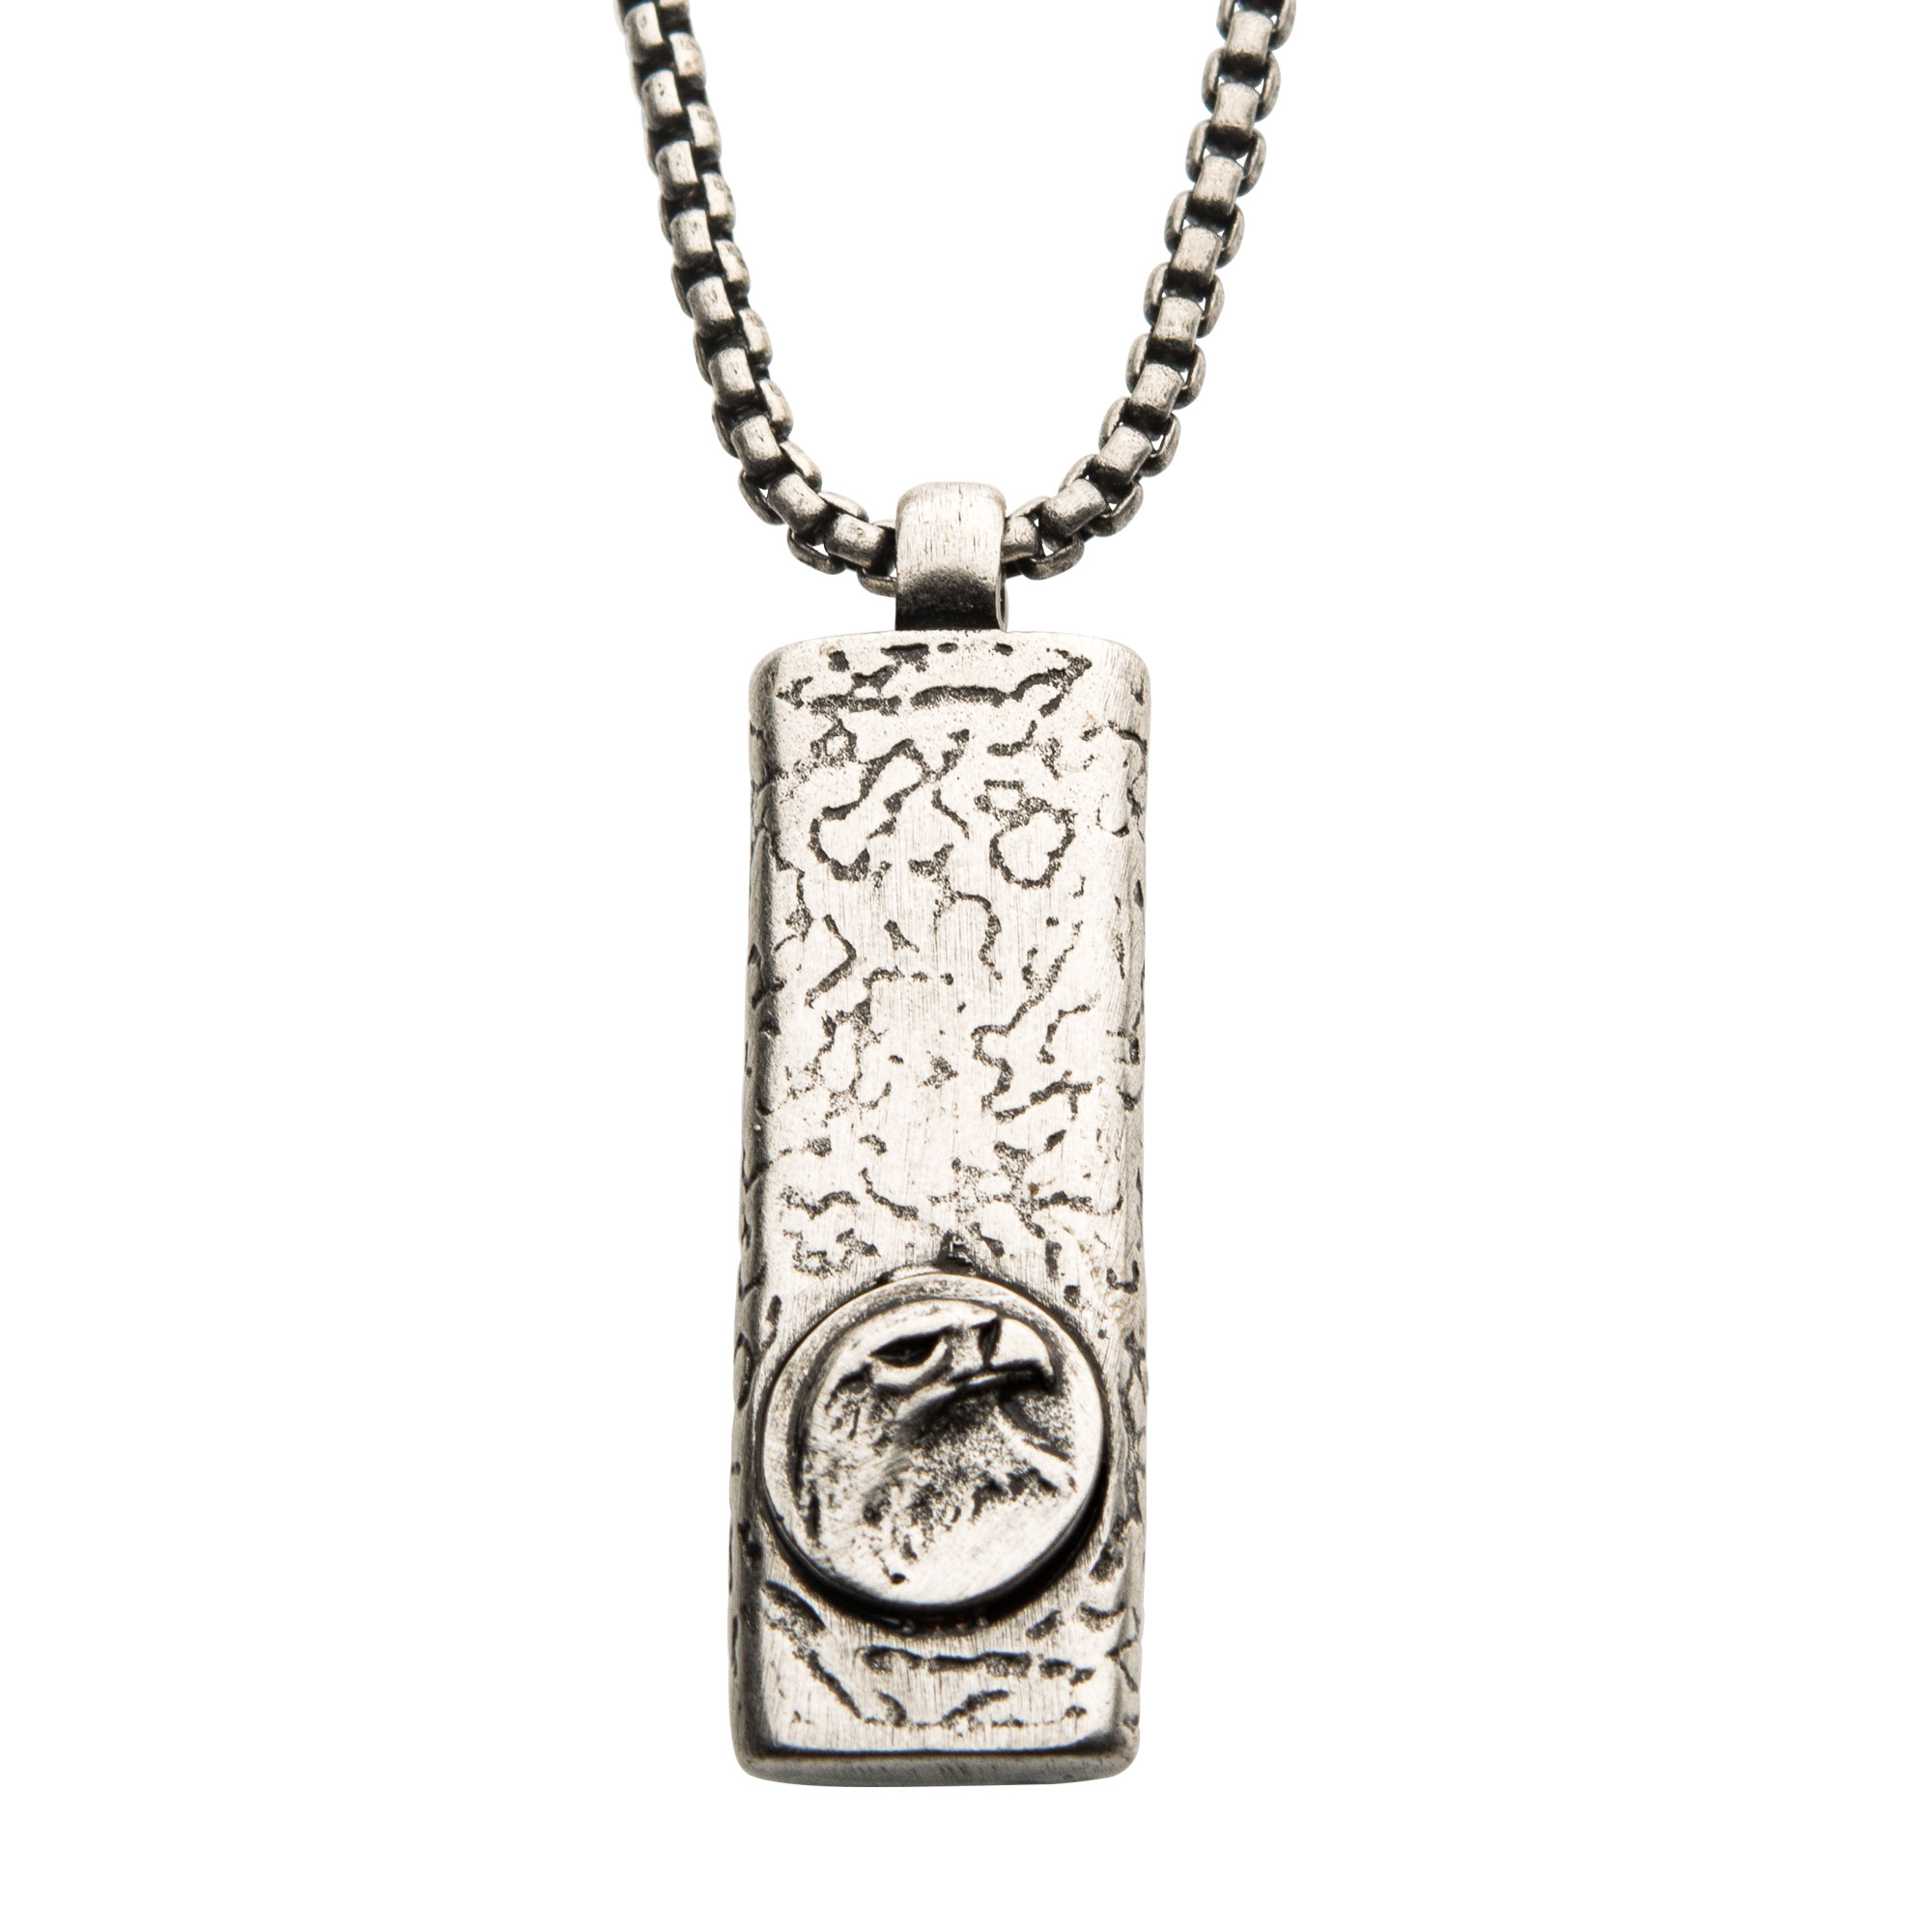 Stainless Steel Silver Plated Dog Tag Pendant with Eagle Head Inlay, with Steel Box Chain Midtown Diamonds Reno, NV